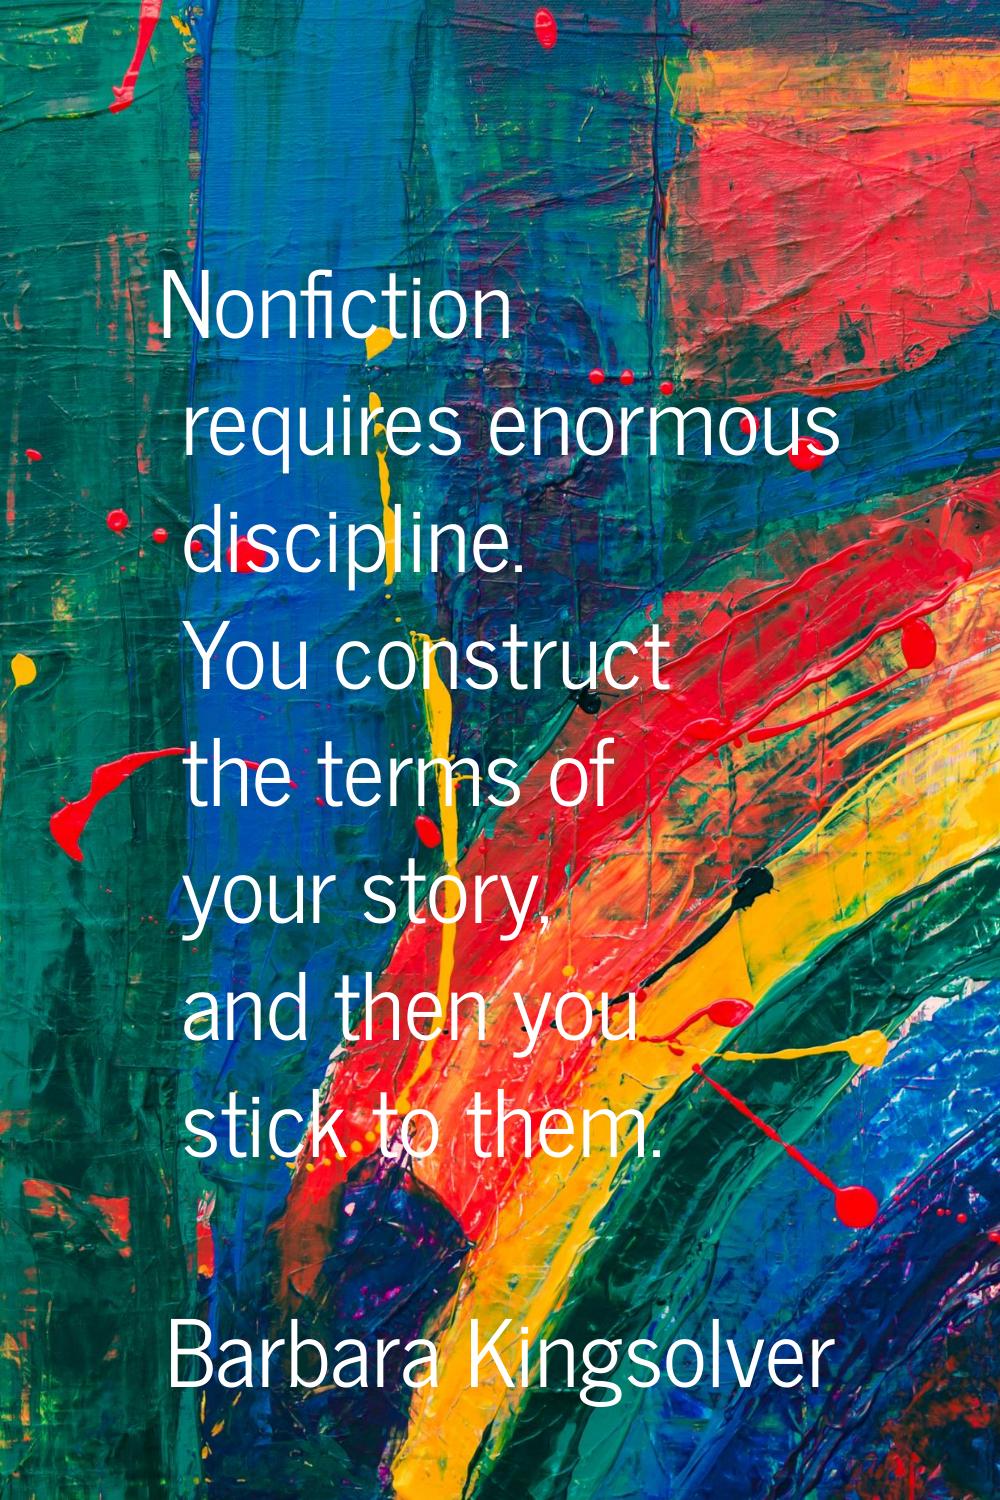 Nonfiction requires enormous discipline. You construct the terms of your story, and then you stick 